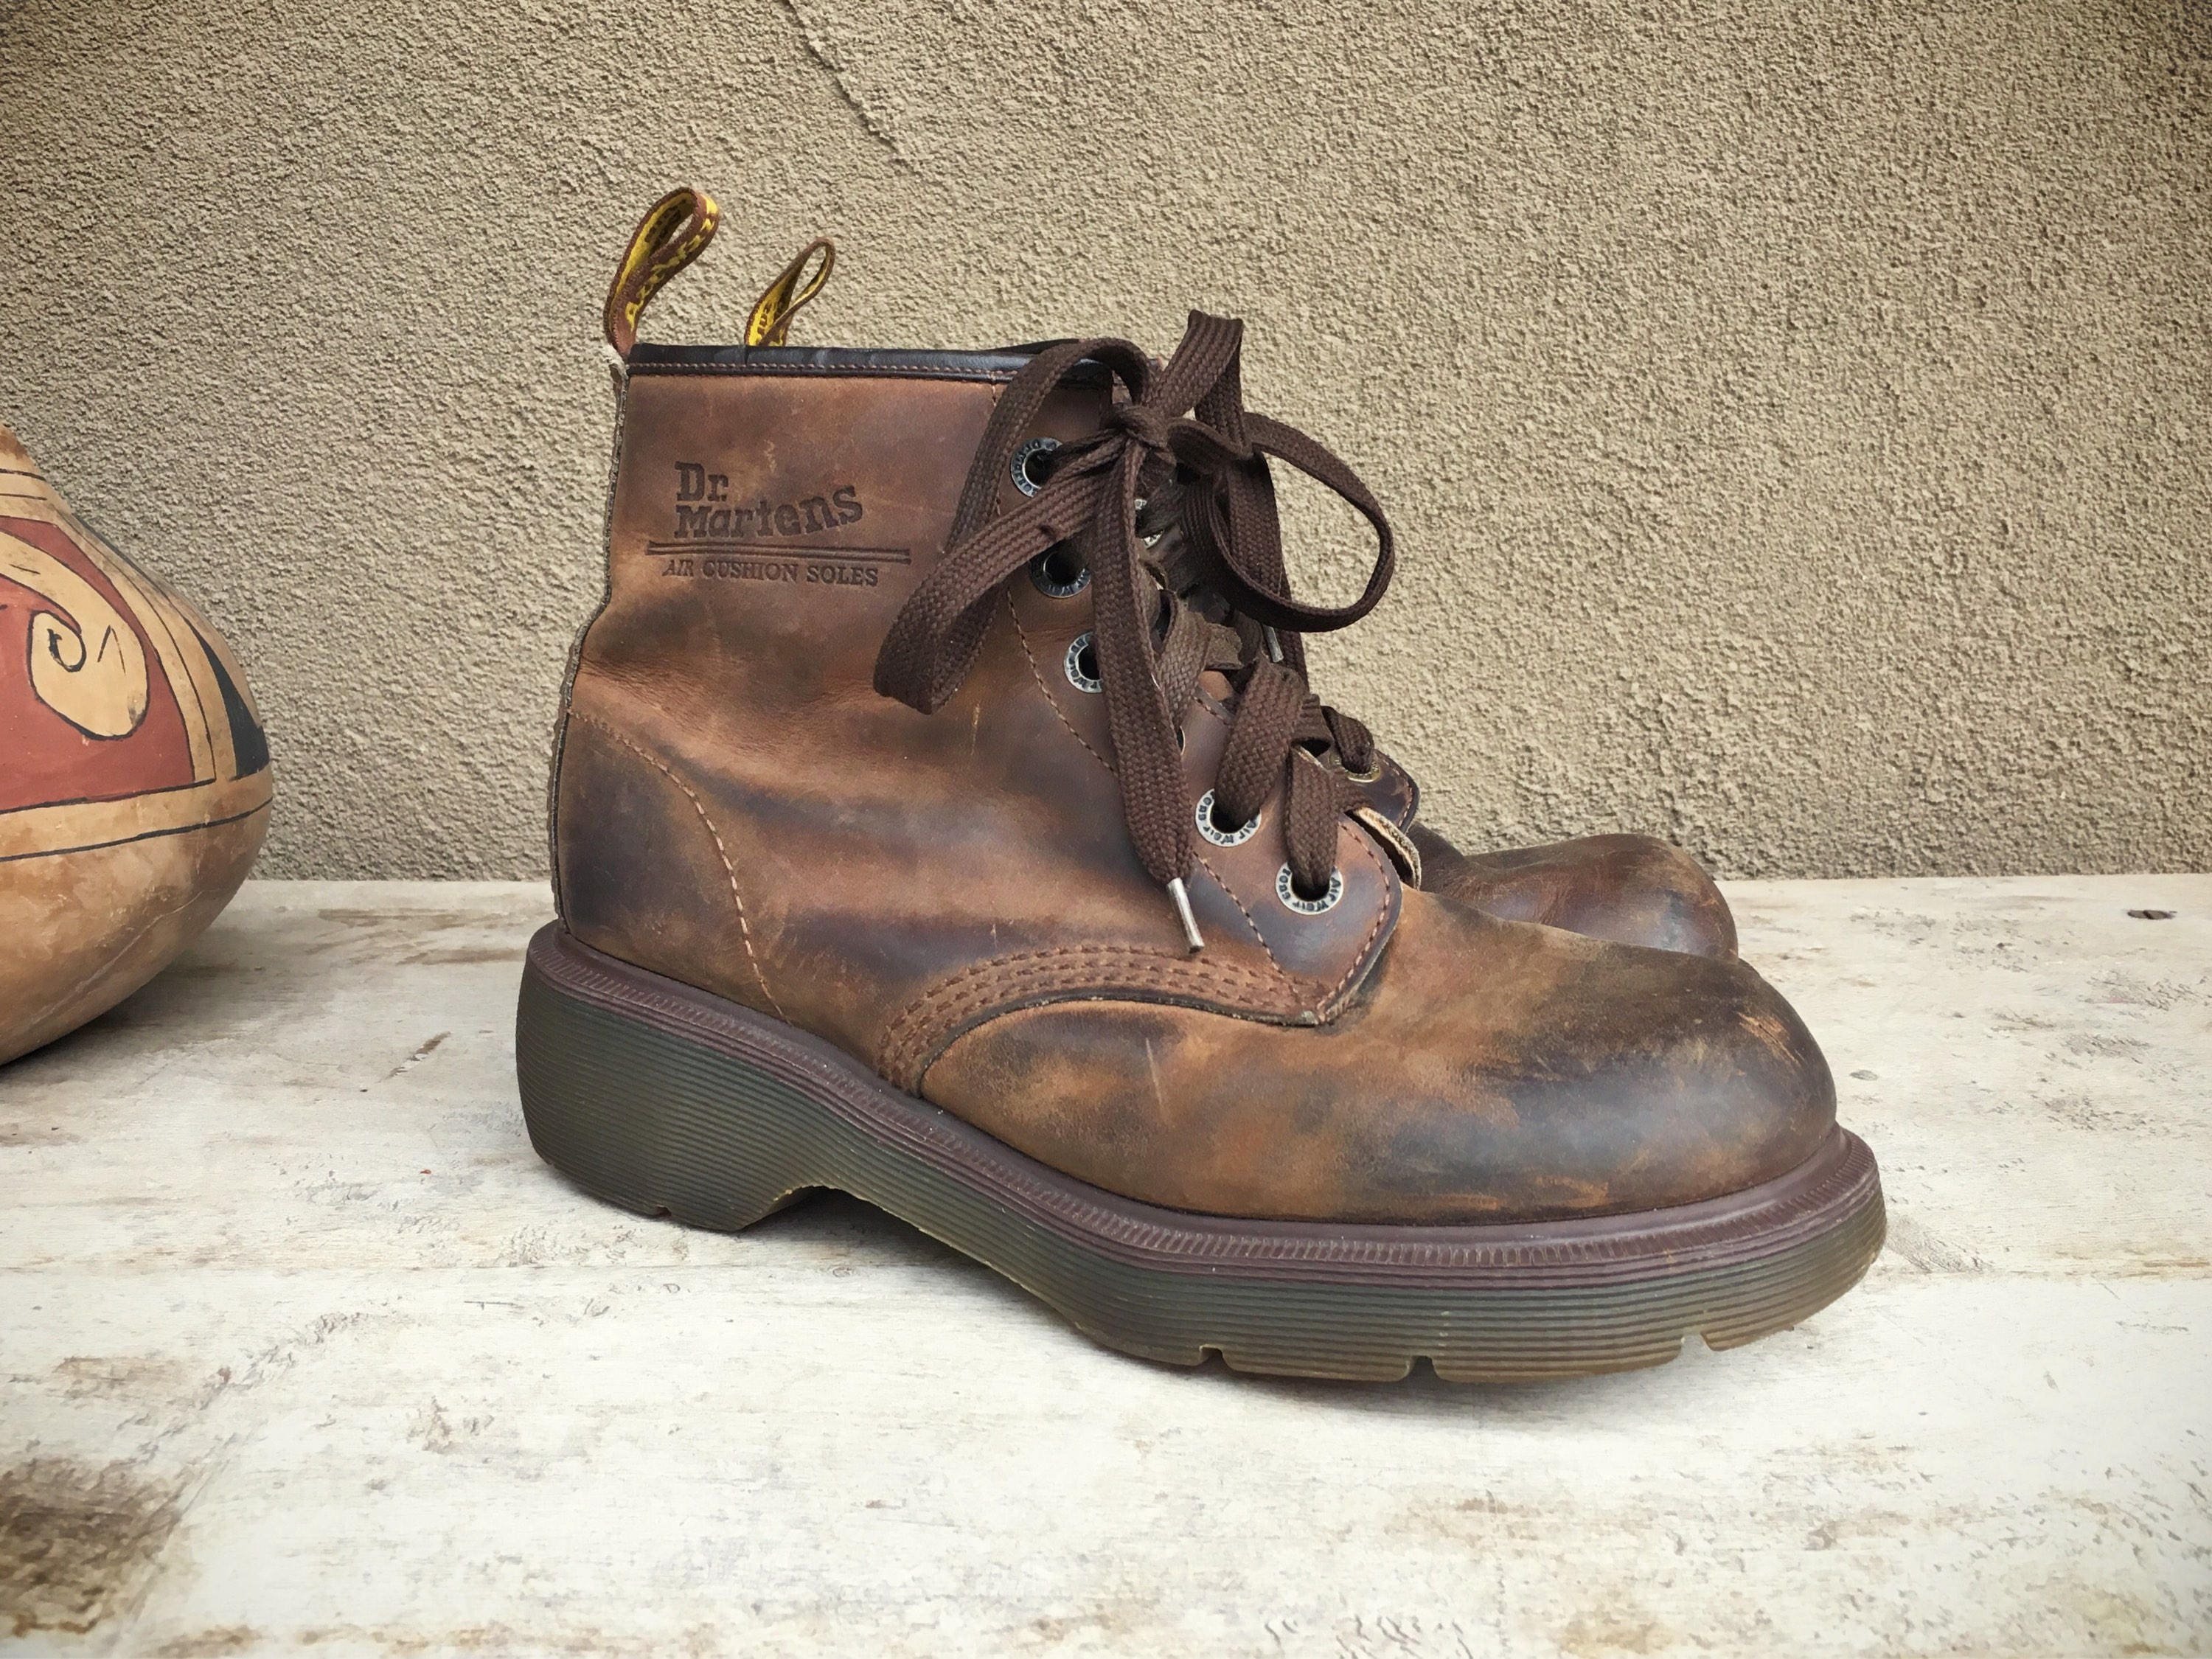 Rare Dr Martens boots no stitching UK Size 5.5 US Women Size 7.5 brown ...